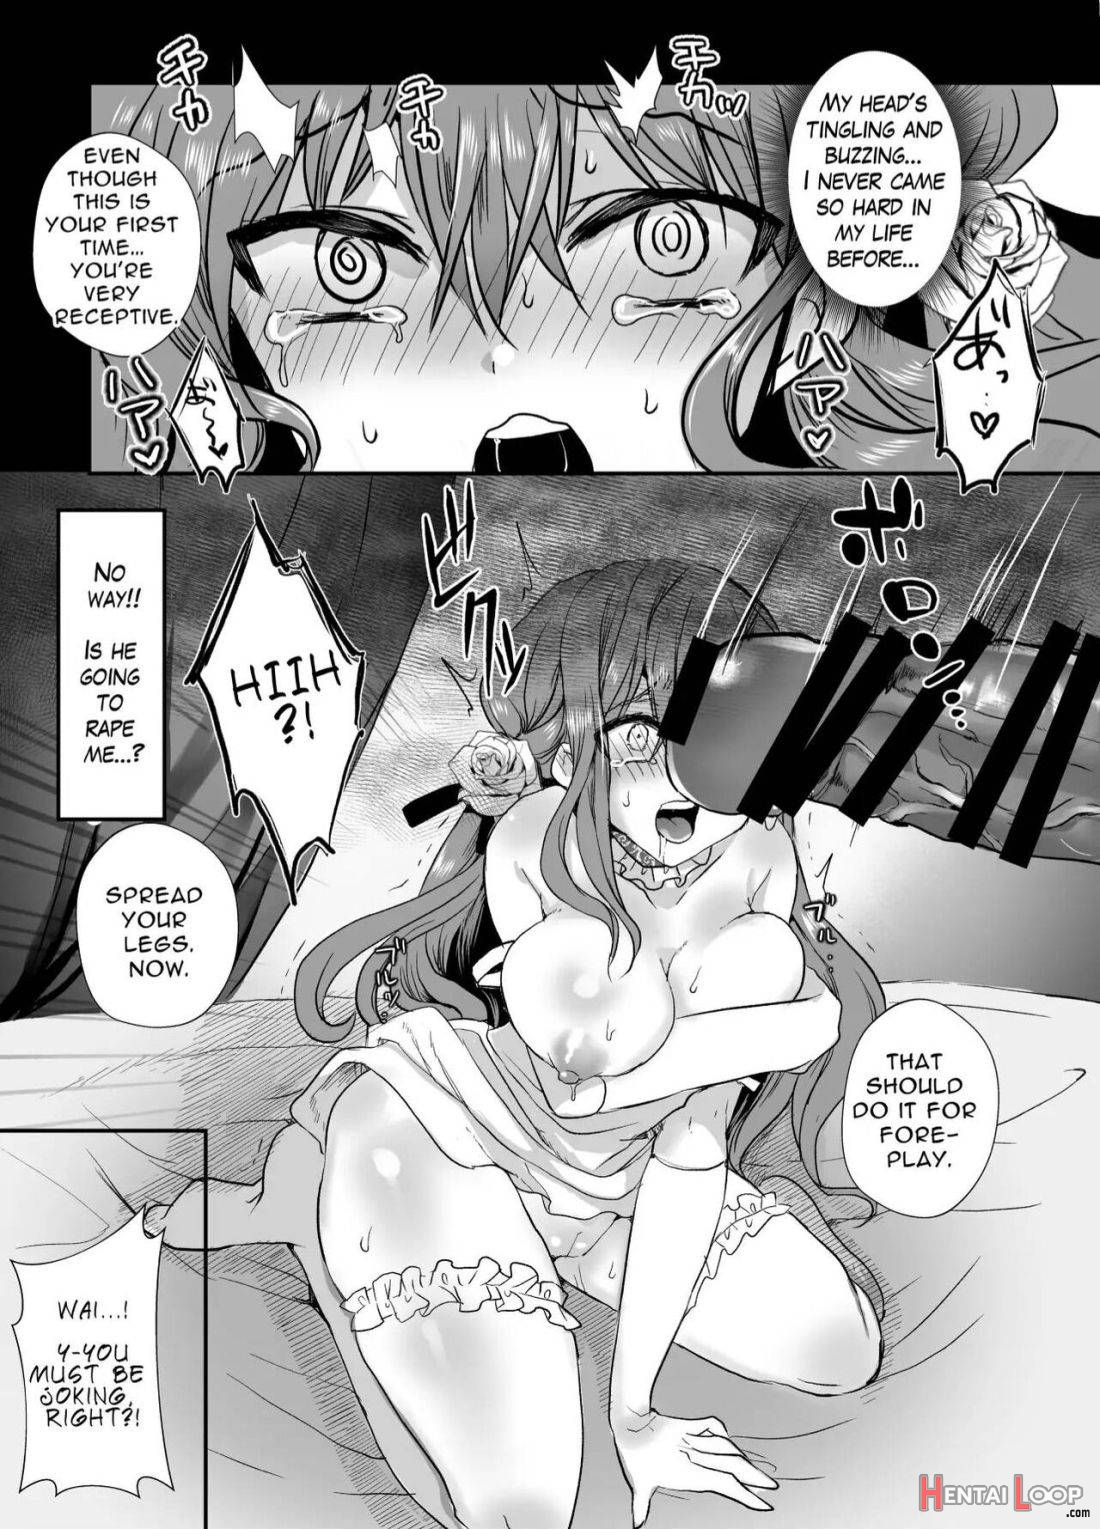  JK’s Tragic Isekai Reincarnation as the Villainess ~But My Precious Side Character!~ page 28